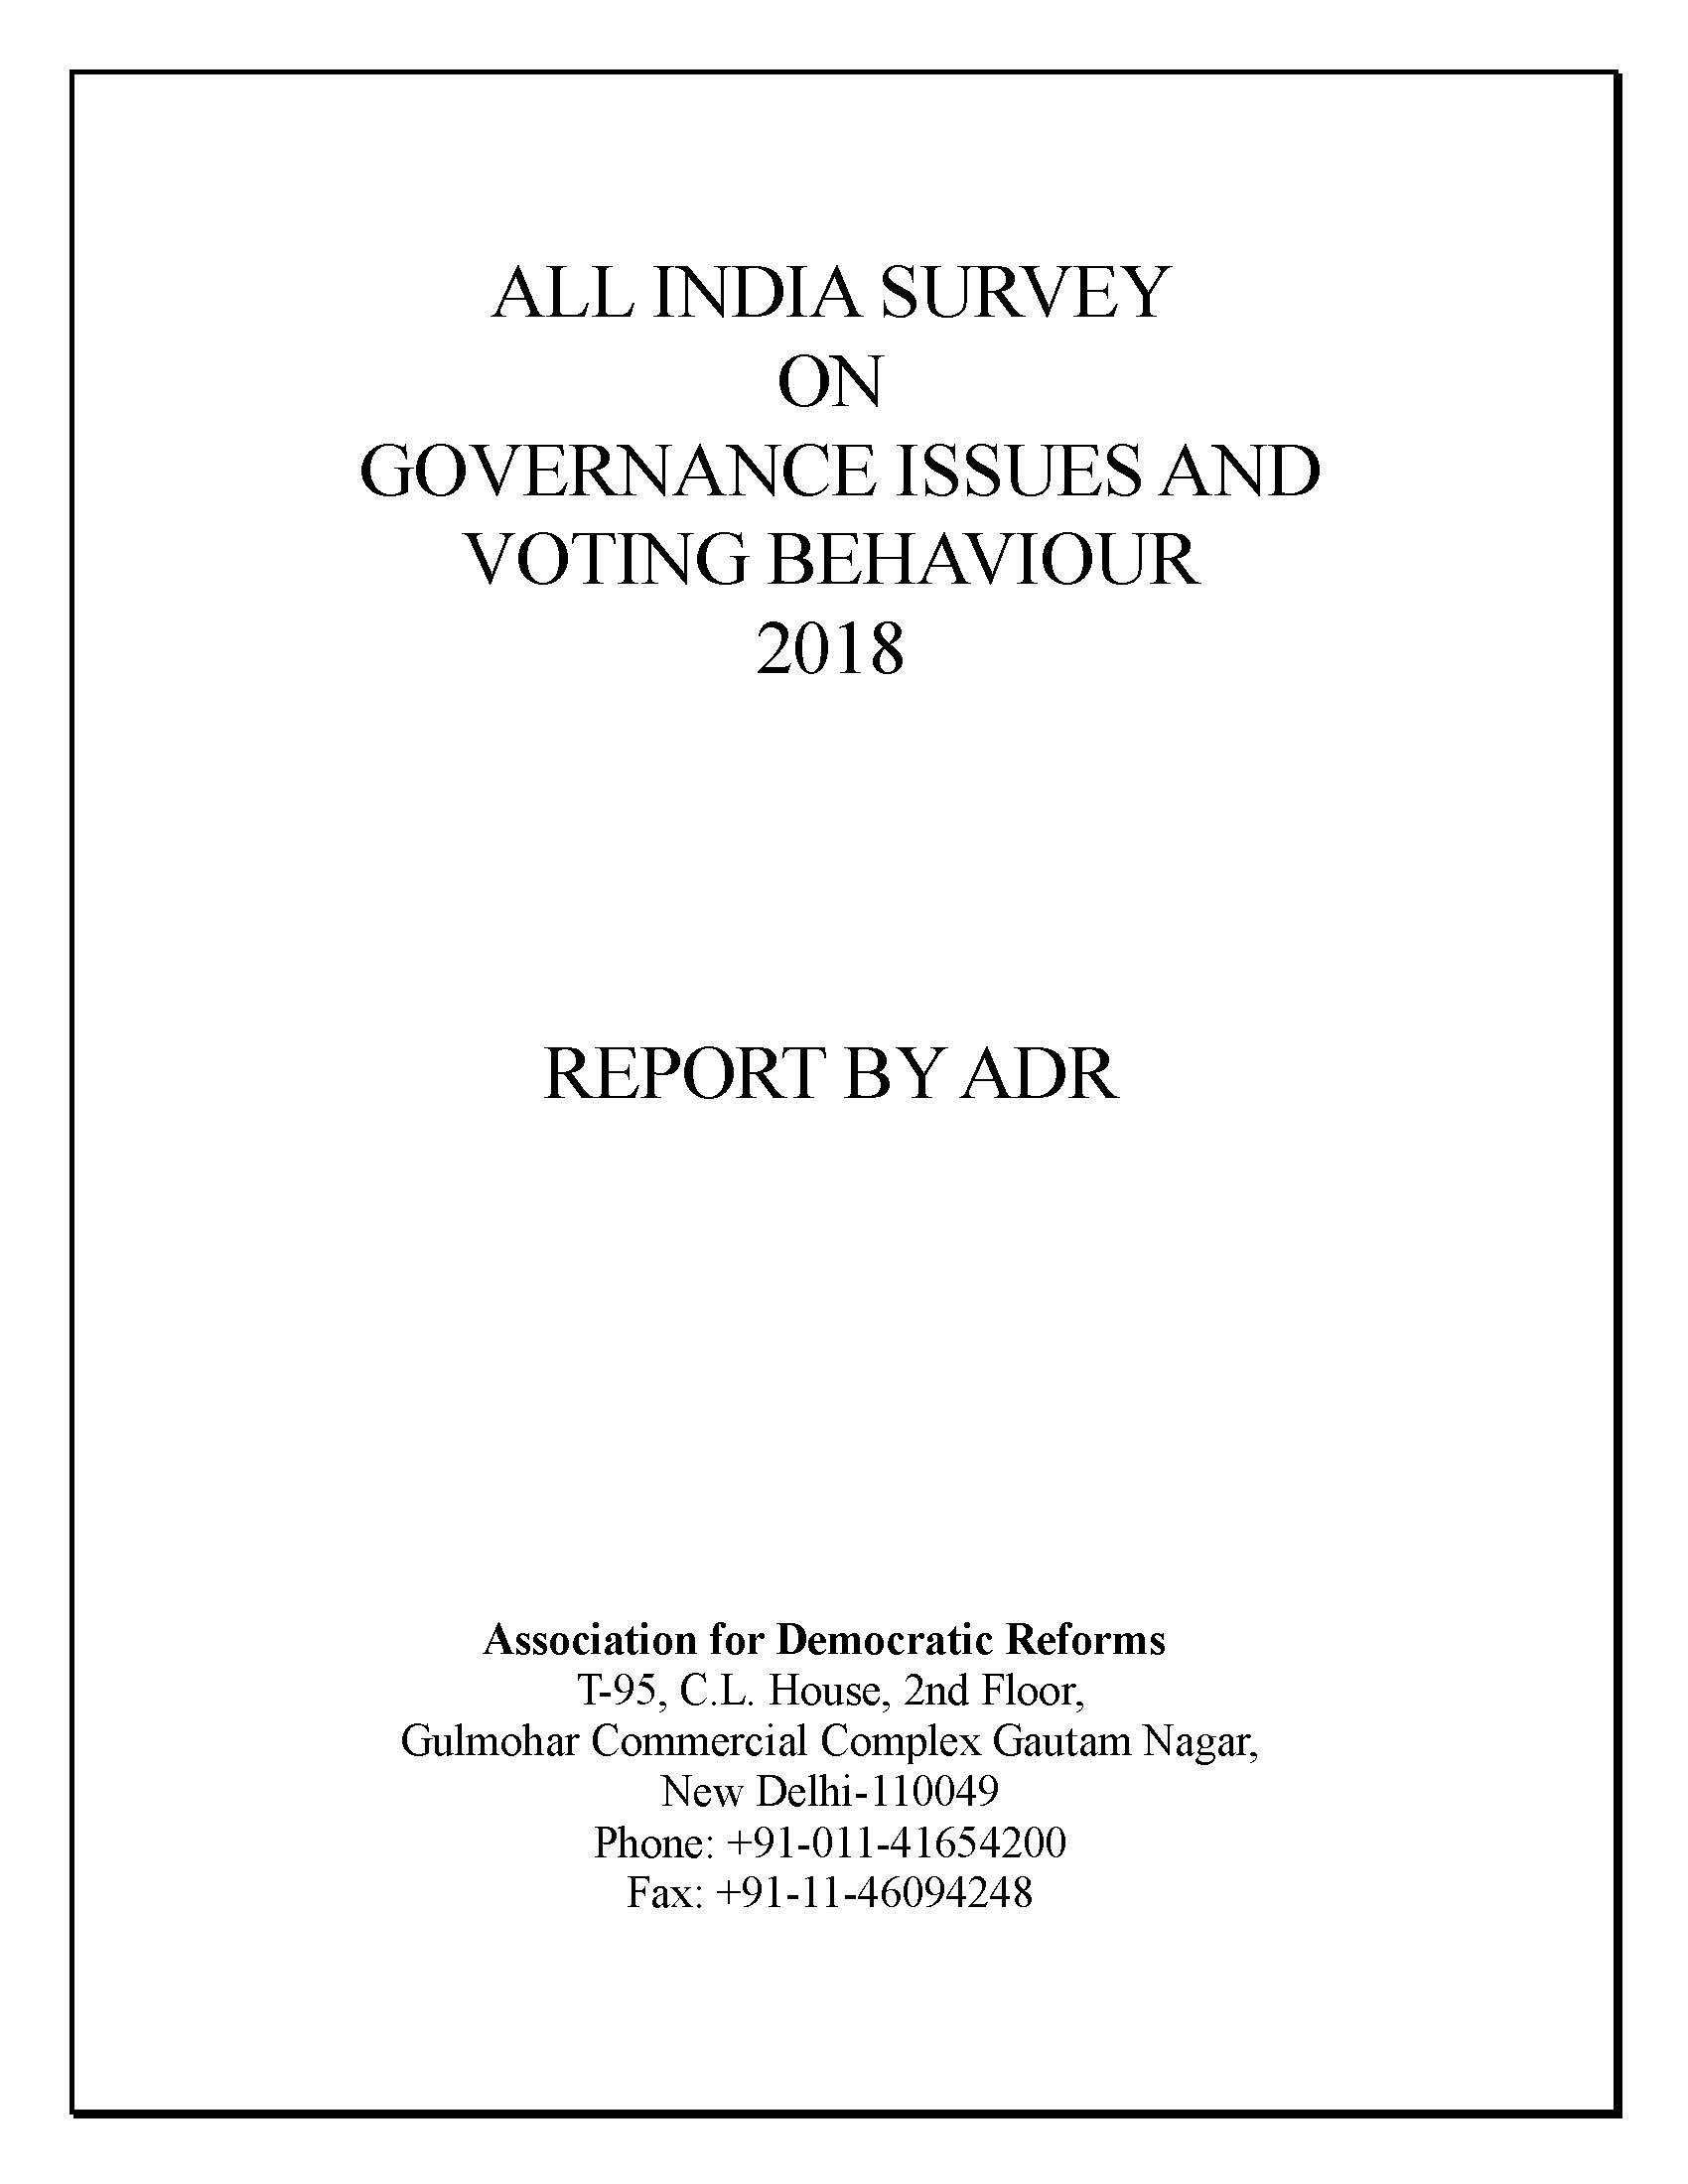 All India Survey on Governance Issues and Voting Behaviour 2018